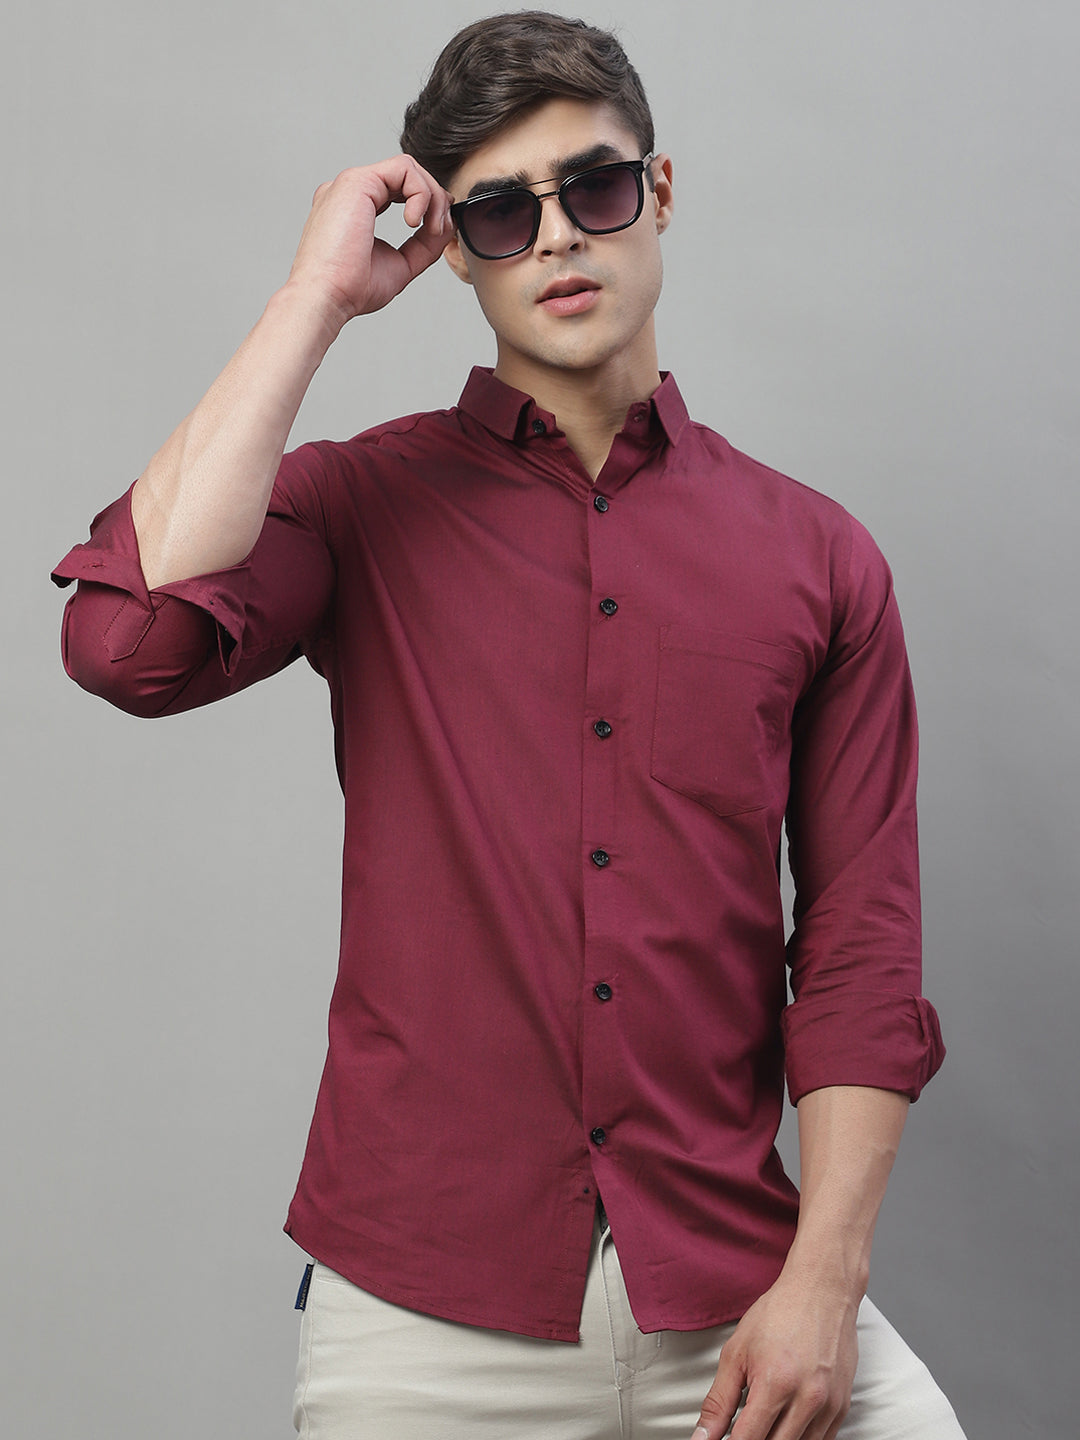 Unique and Classy Casual Shirt - Maroon